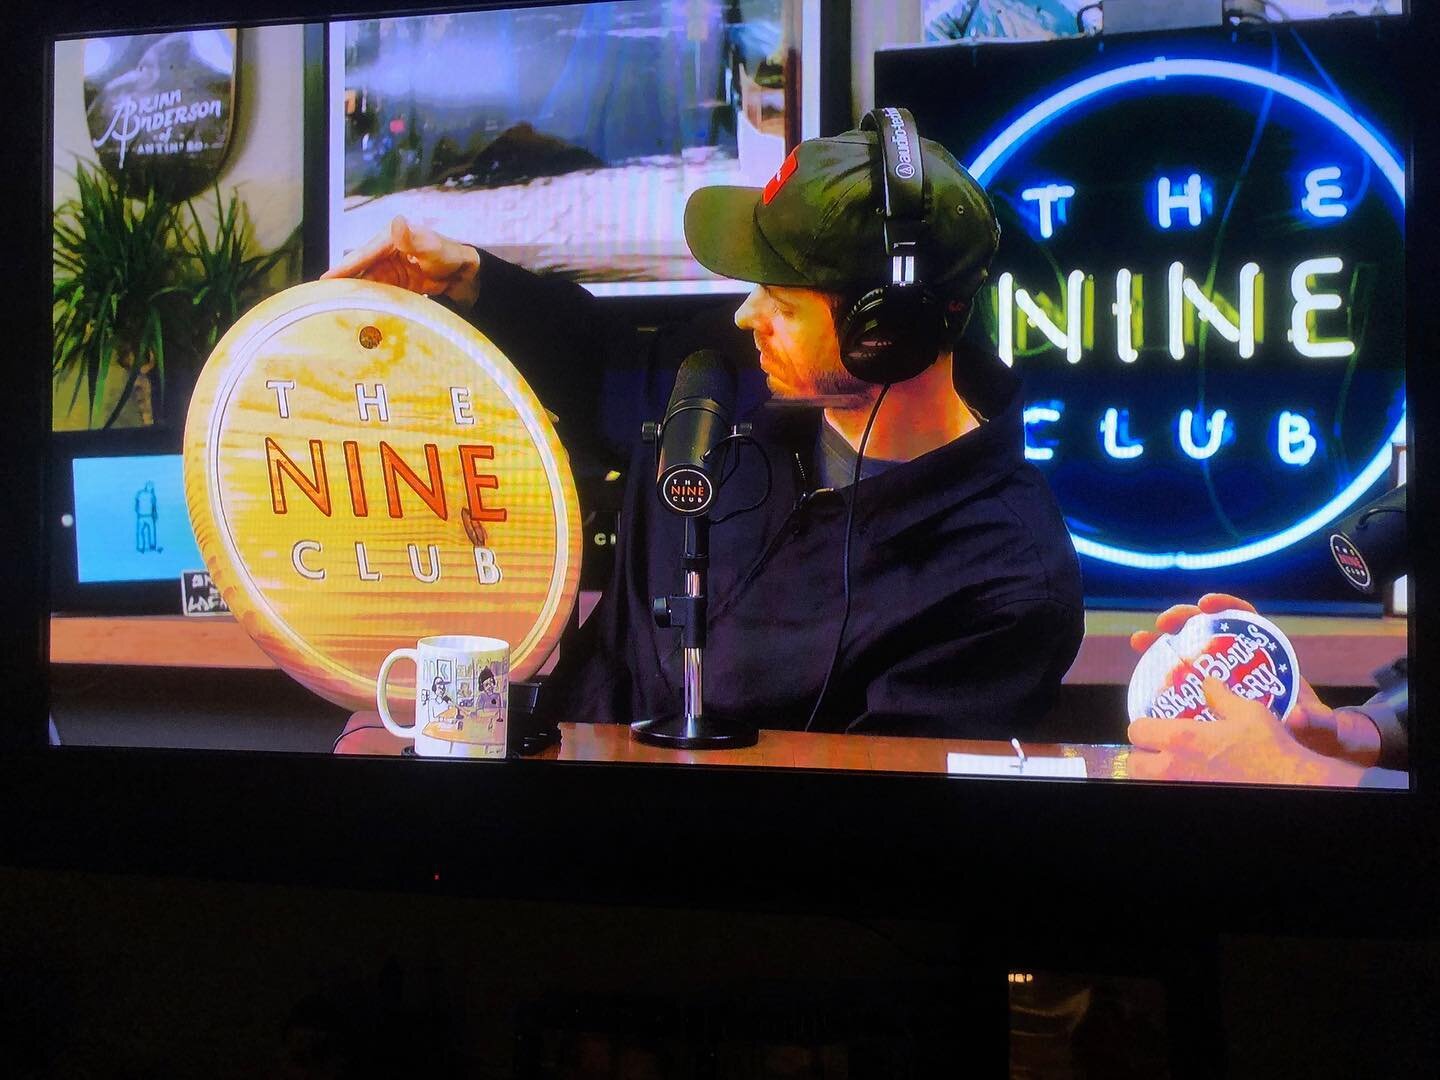 Check out @thenineclub and you might catch a glimpse of it hanging up in the background. @twincammike1 #skateboarding #podcastshow #shareyourcreativity #cmastdesigns